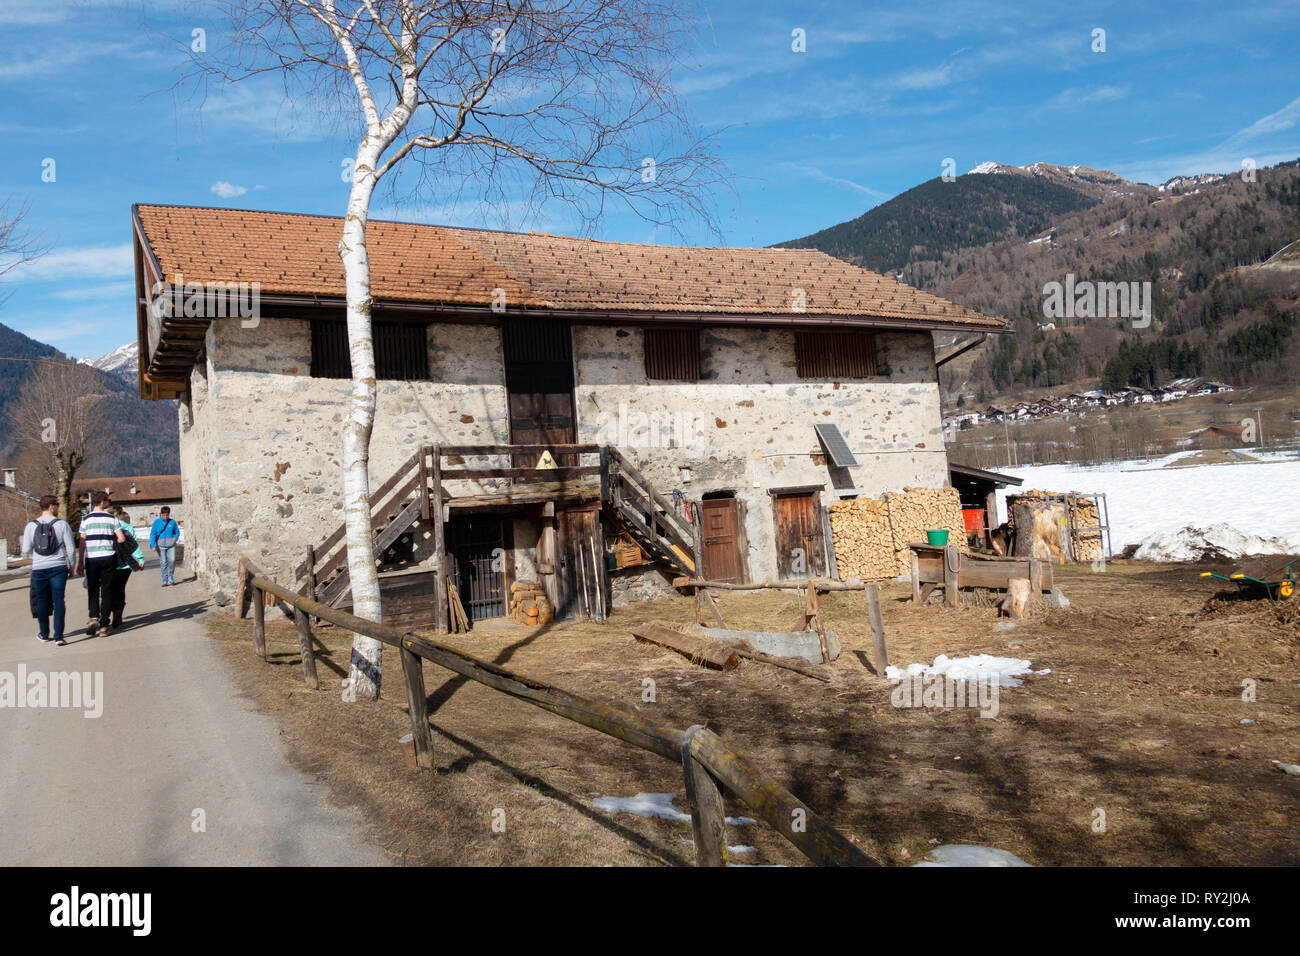 People walking past a farmhouse, the village of Pinzolo in the Brenta Dolomites, northern Italy Europe Stock Photo